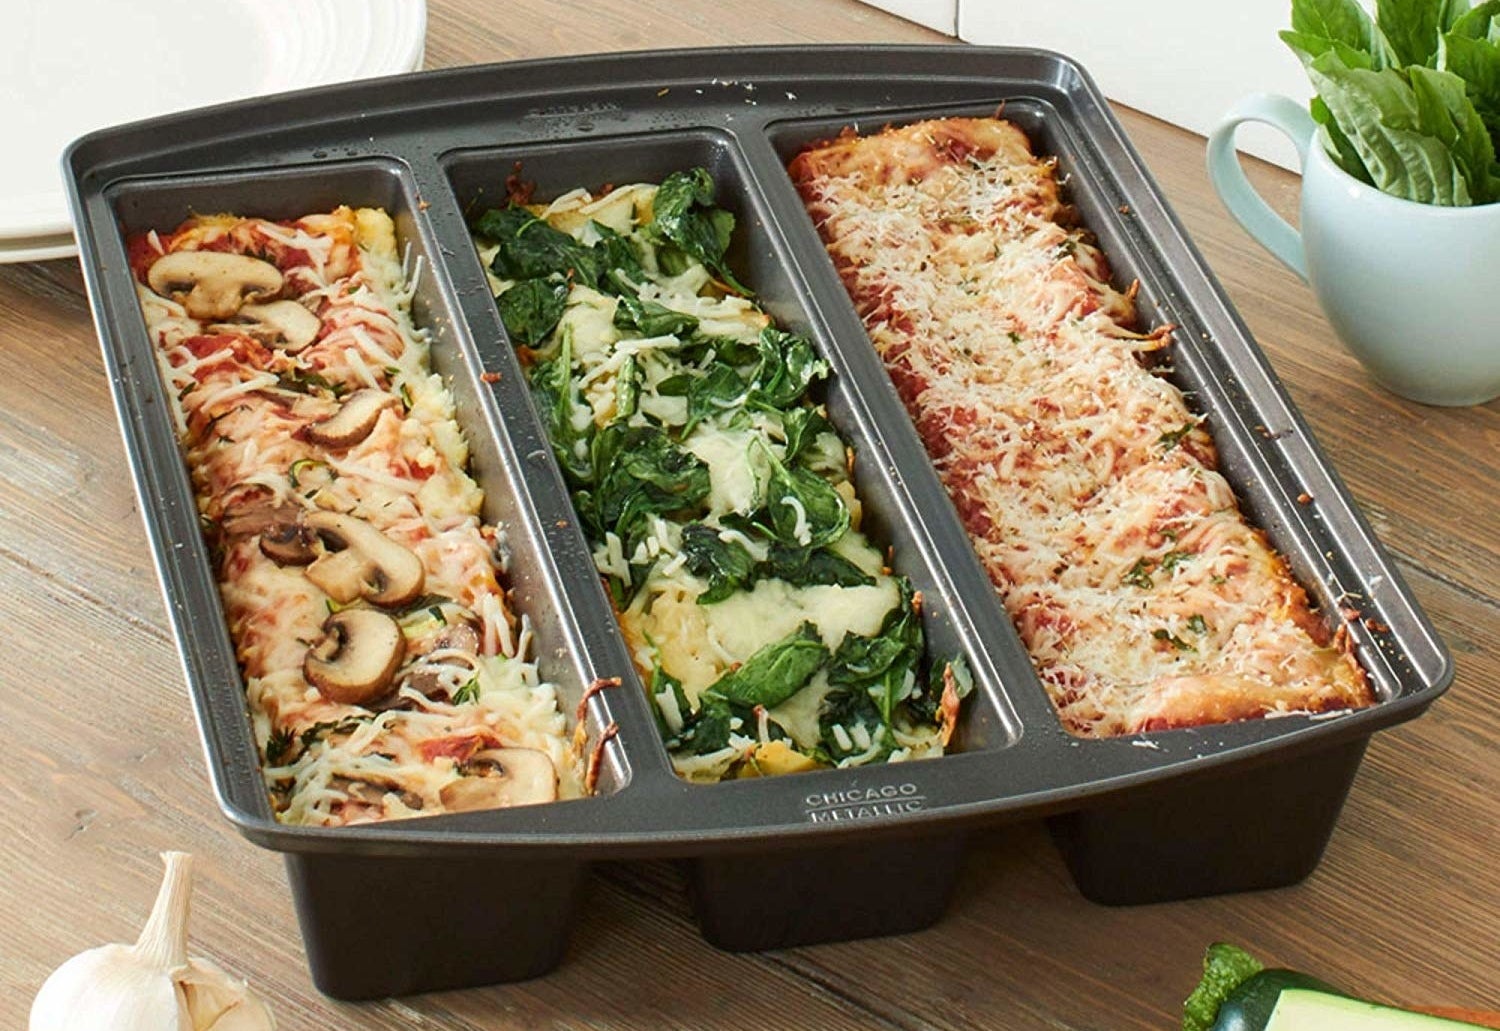 The lasagna trio pan with three different types of lasagna in it